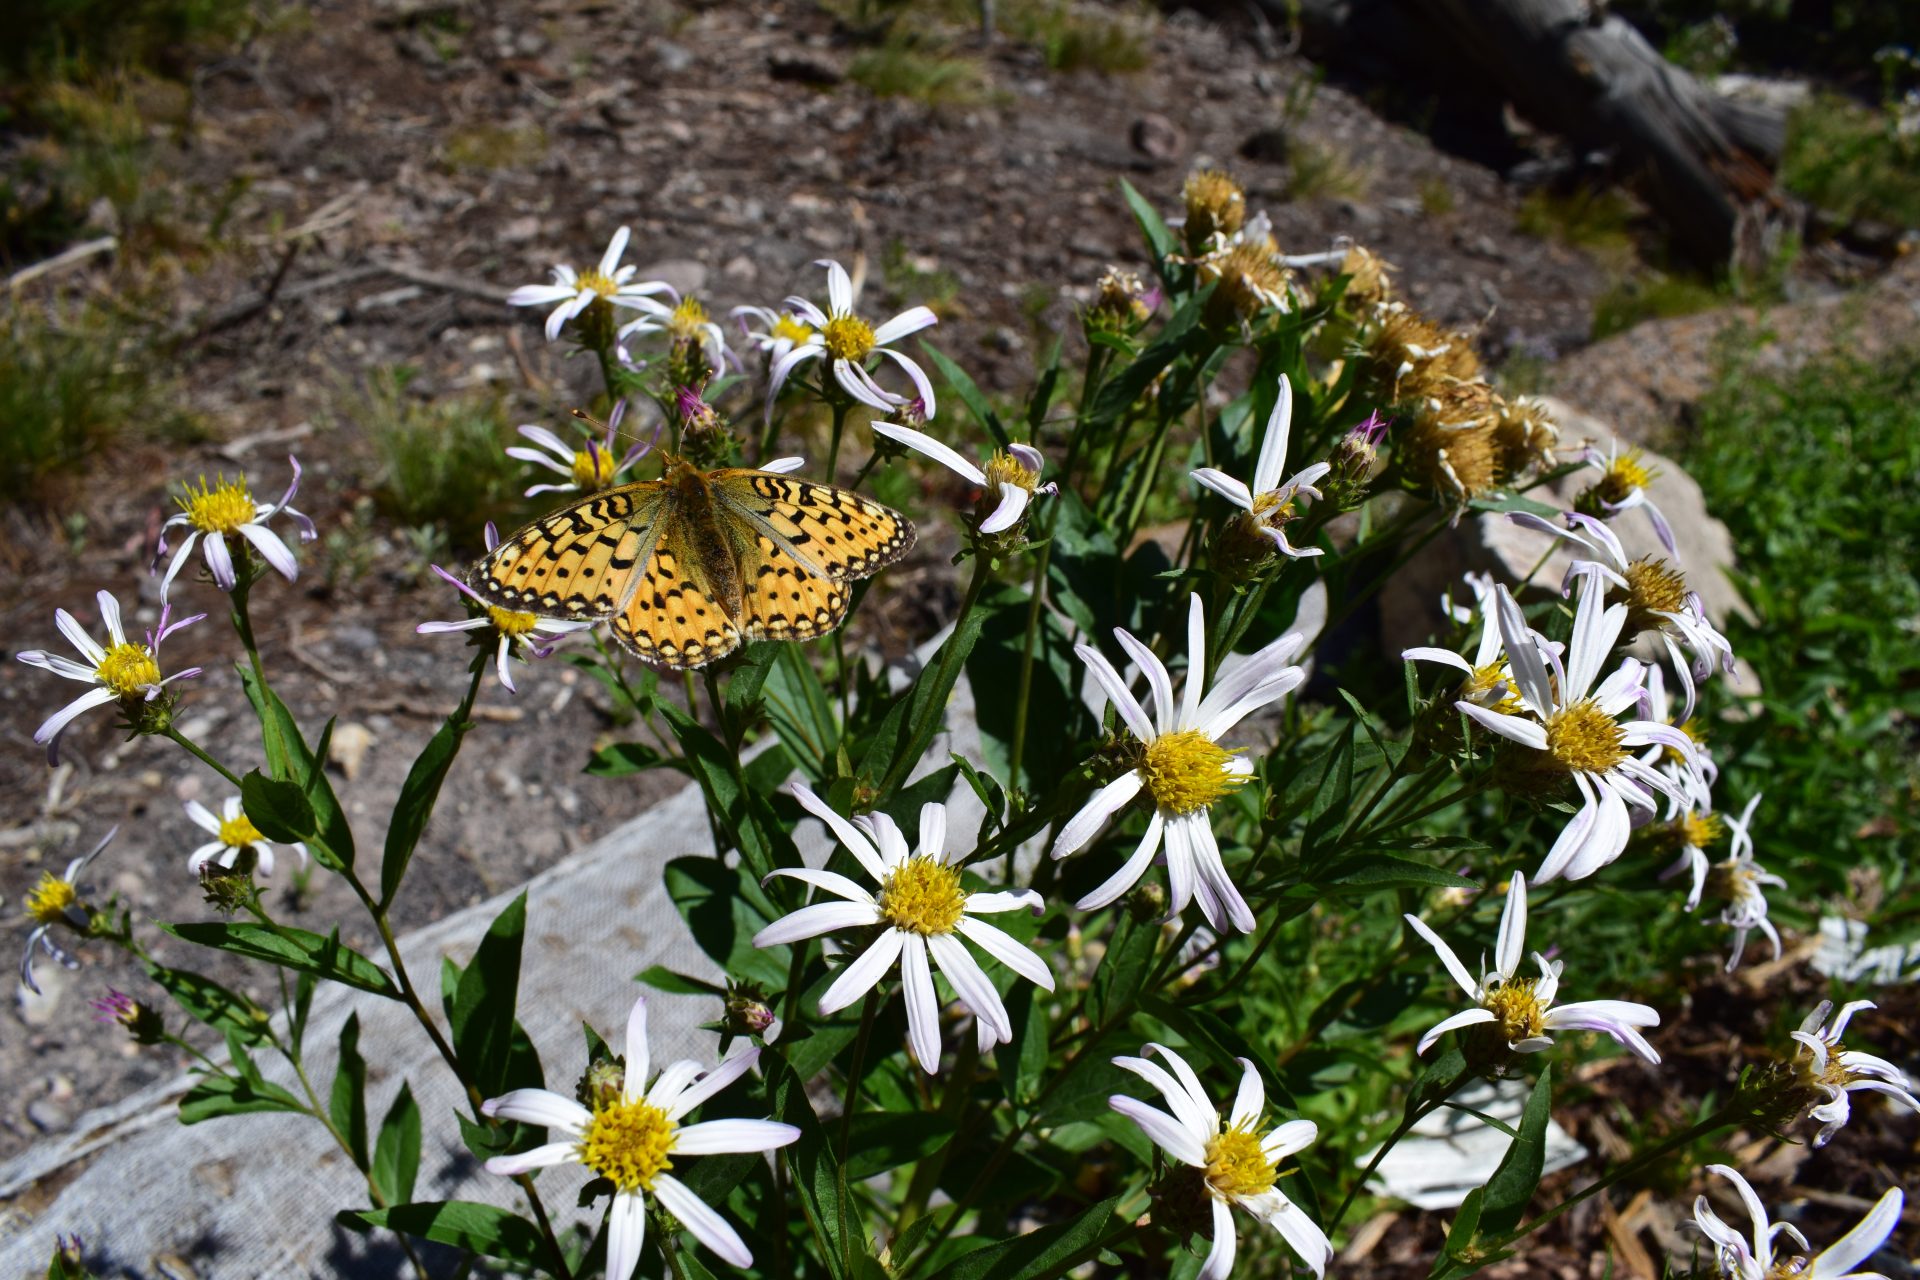 yellow butterfly on white flowers with long, skinny petals